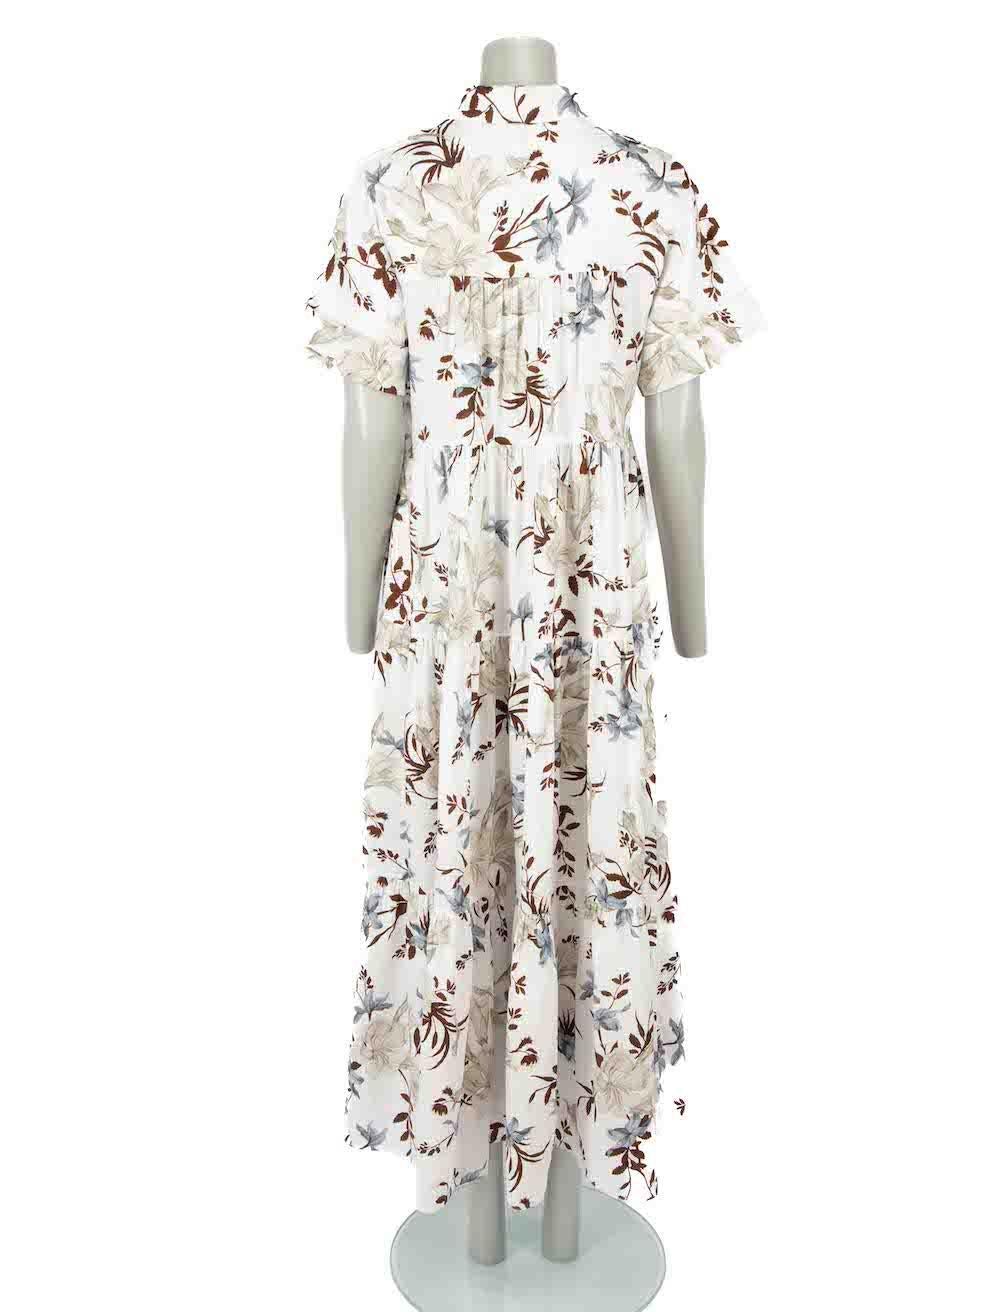 Erdem White Floral Print Tiered Shirt Dress Size L In Good Condition For Sale In London, GB